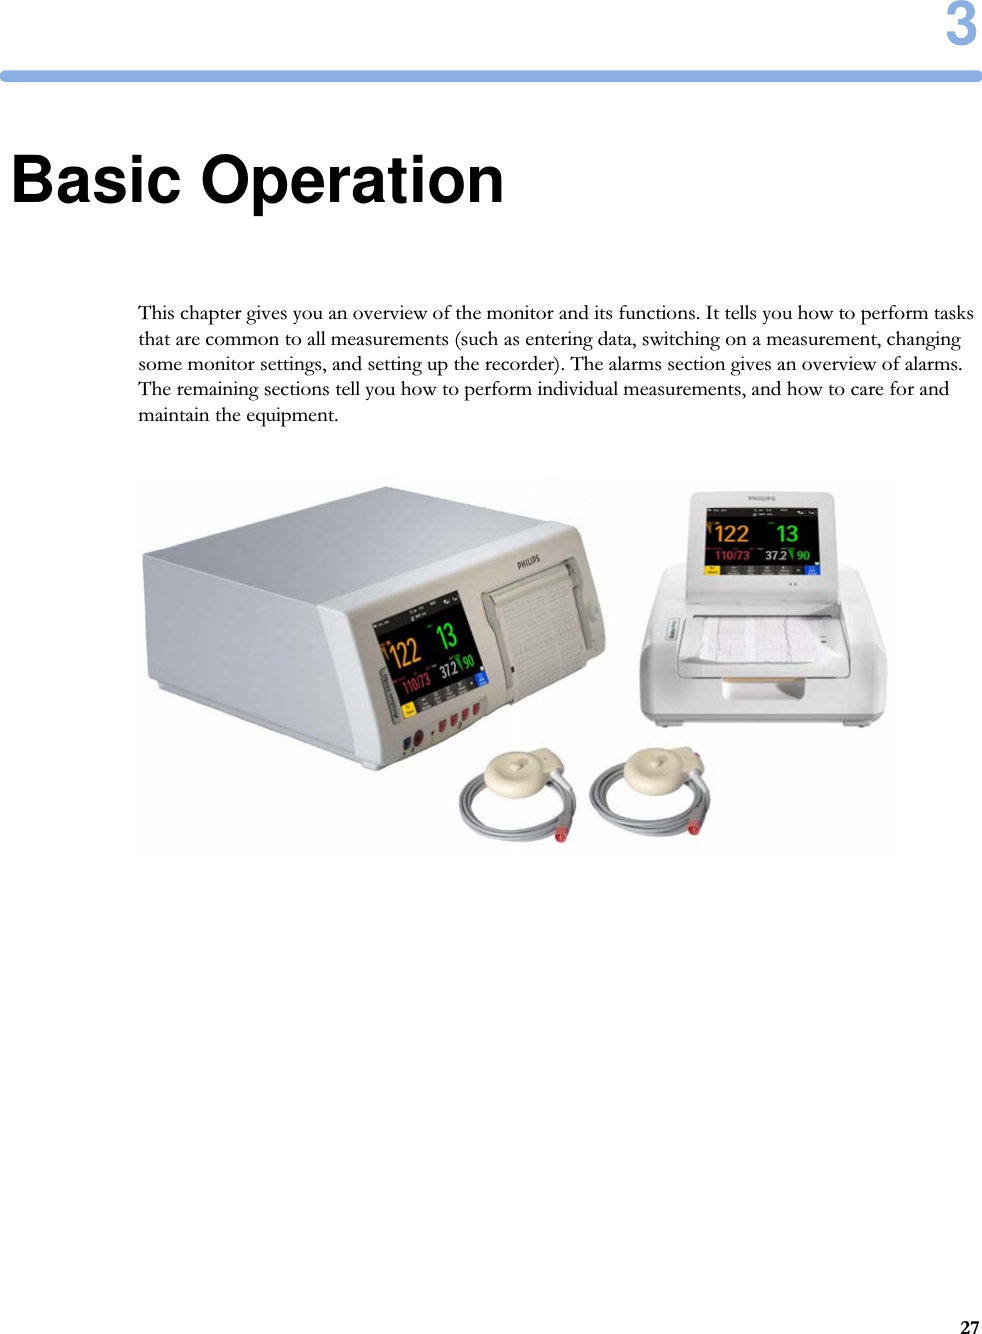 3273Basic OperationThis chapter gives you an overview of the monitor and its functions. It tells you how to perform tasks that are common to all measurements (such as entering data, switching on a measurement, changing some monitor settings, and setting up the recorder). The alarms section gives an overview of alarms. The remaining sections tell you how to perform individual measurements, and how to care for and maintain the equipment.